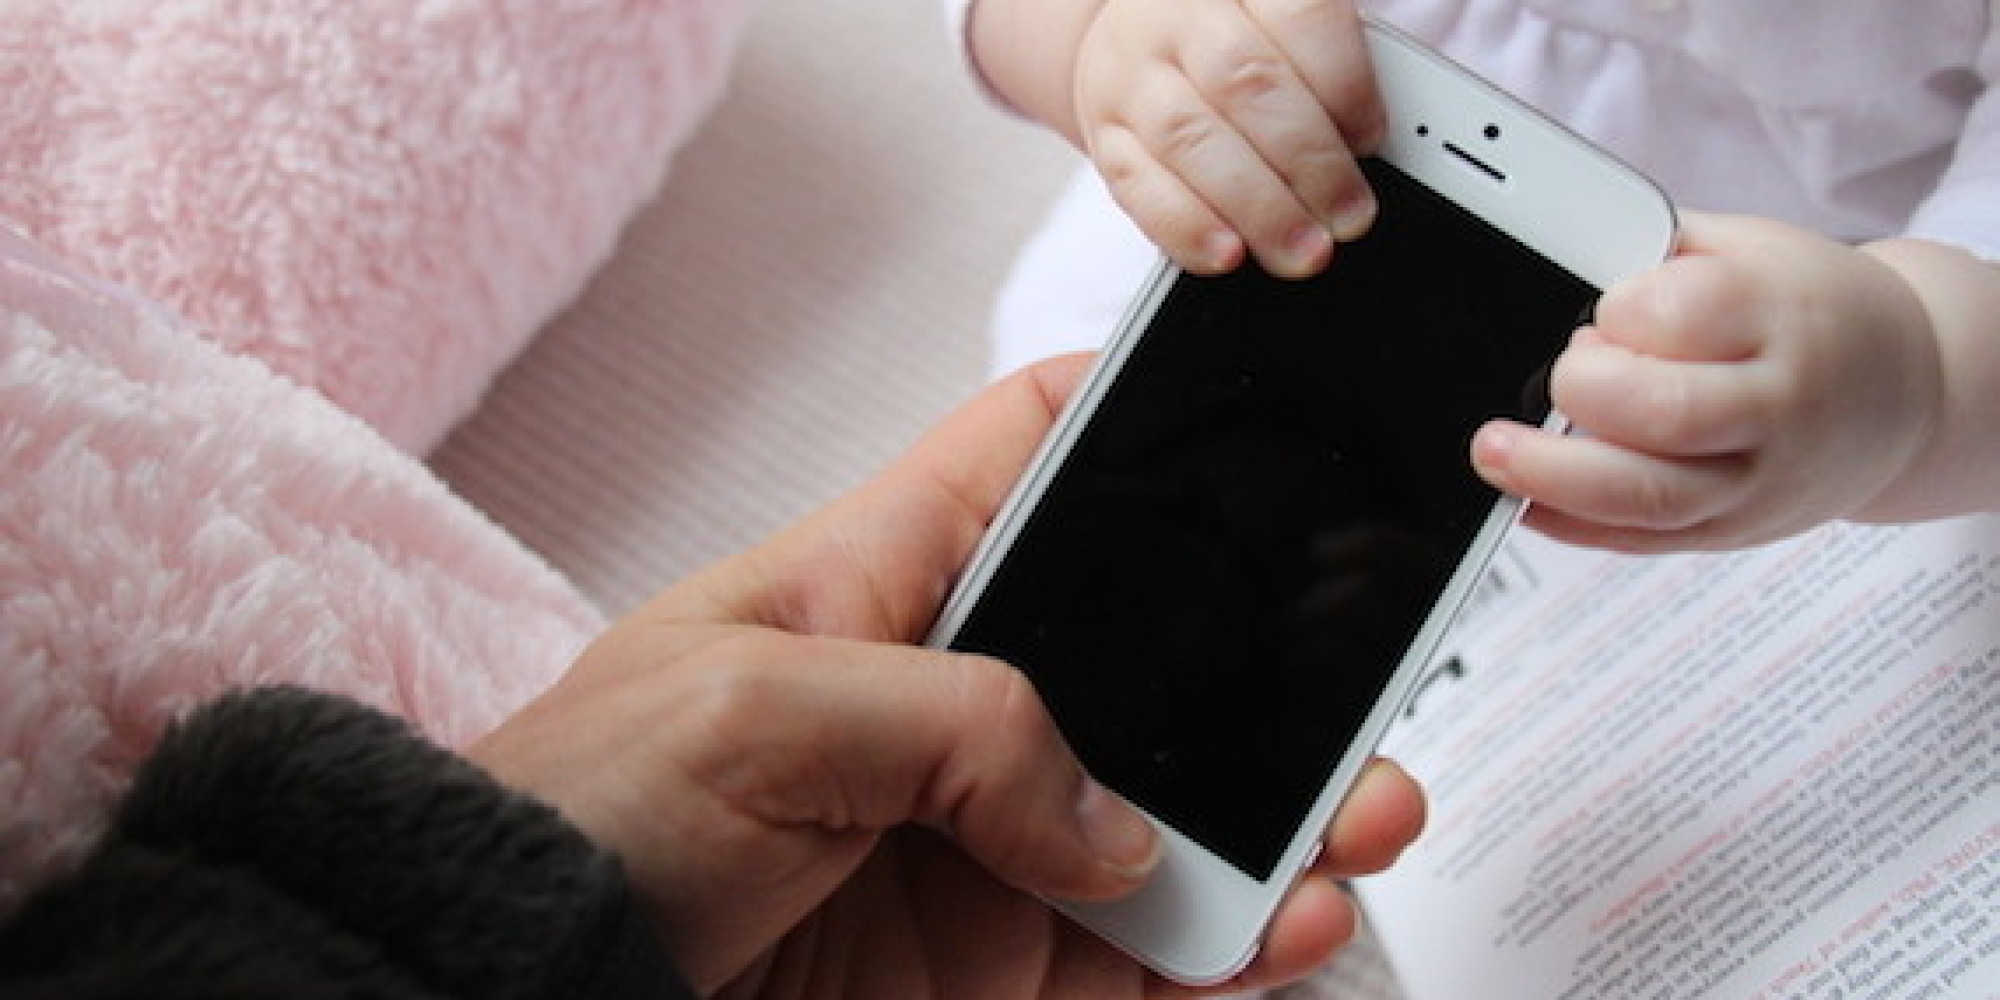 9 Tips That Helped Me Beat My iPhone Addiction HuffPost